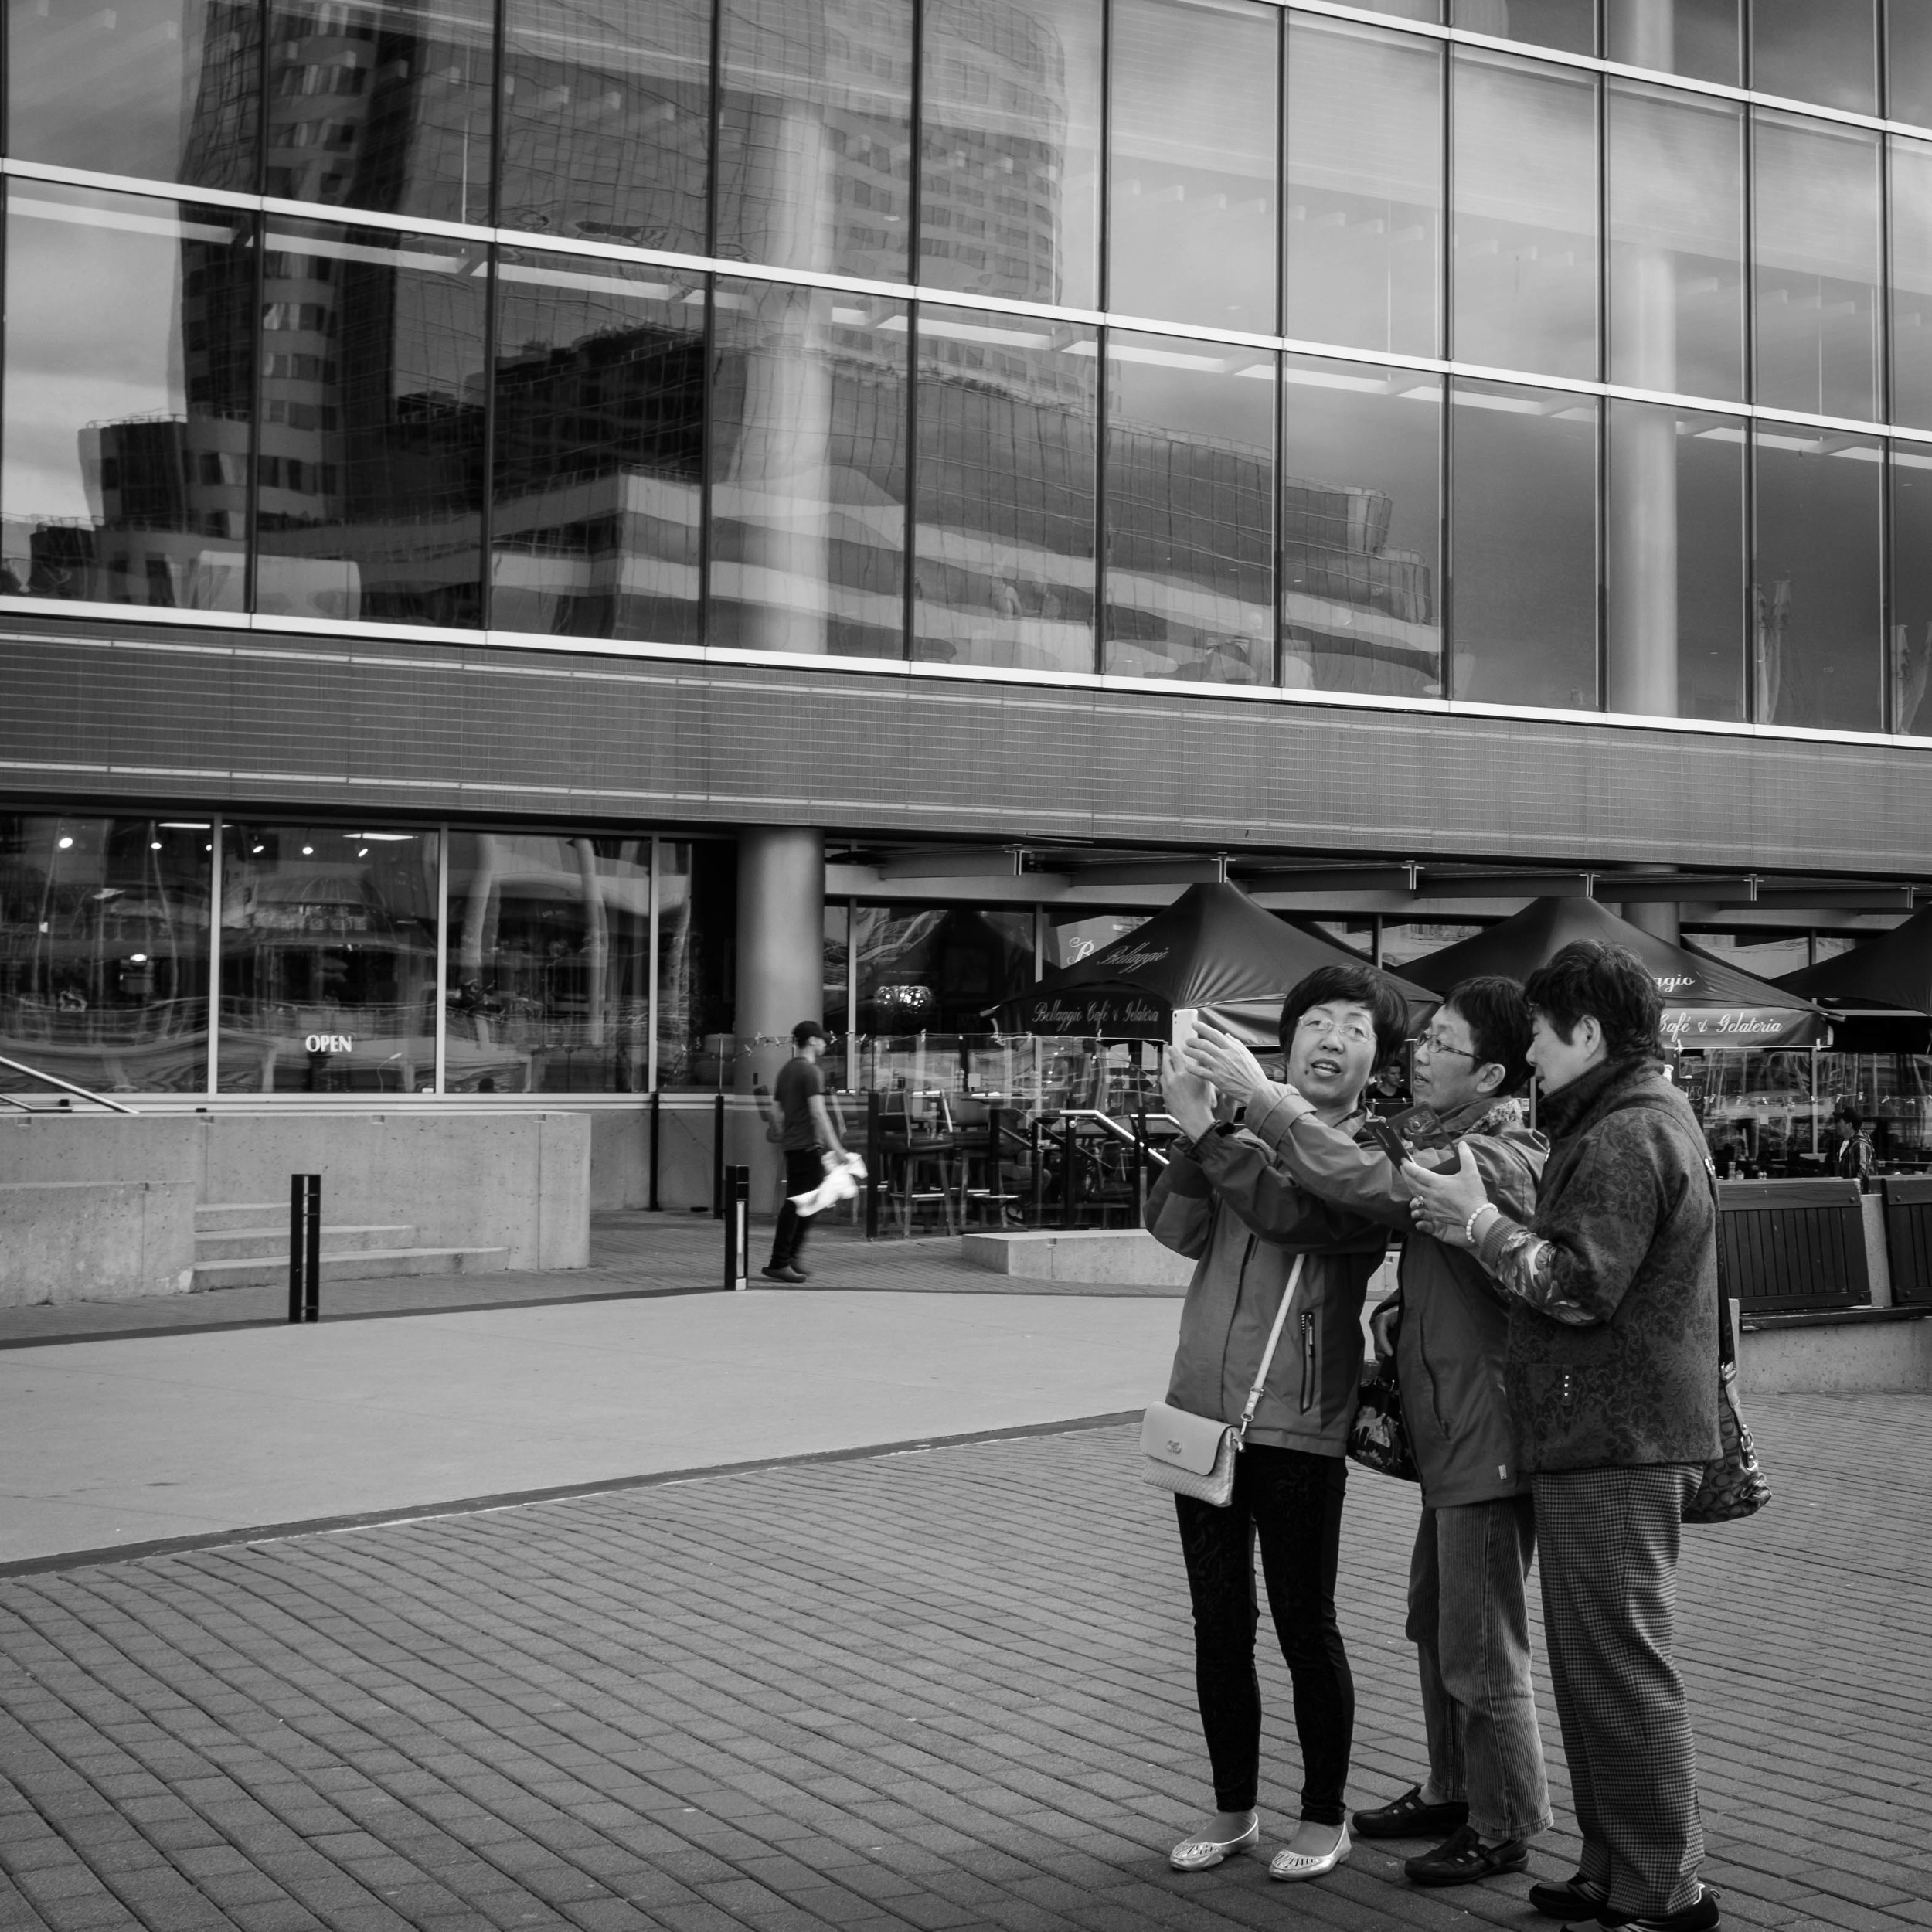  Tourists at Canada Place Vancouver Fuji X100T 6.16 